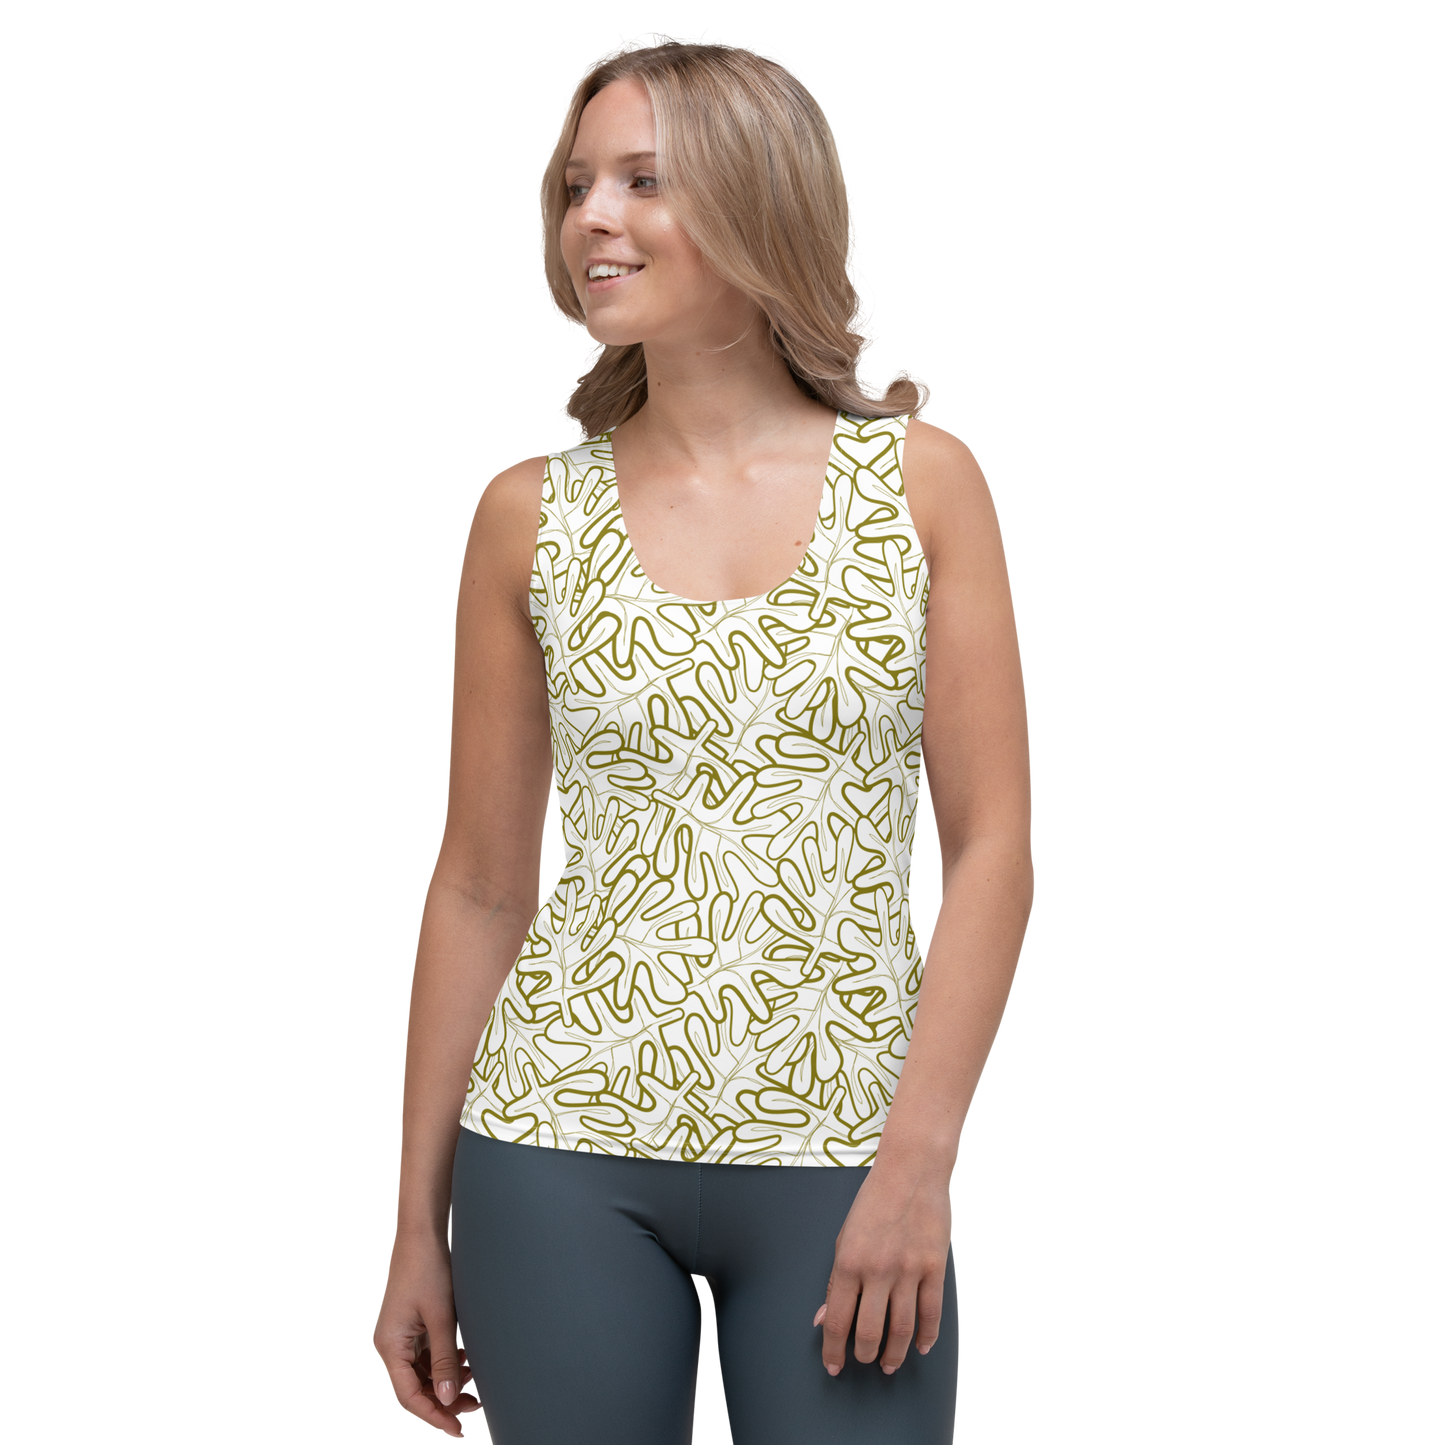 Colorful Fall Leaves | Seamless Patterns | All-Over Print Women's Tank Top - #2